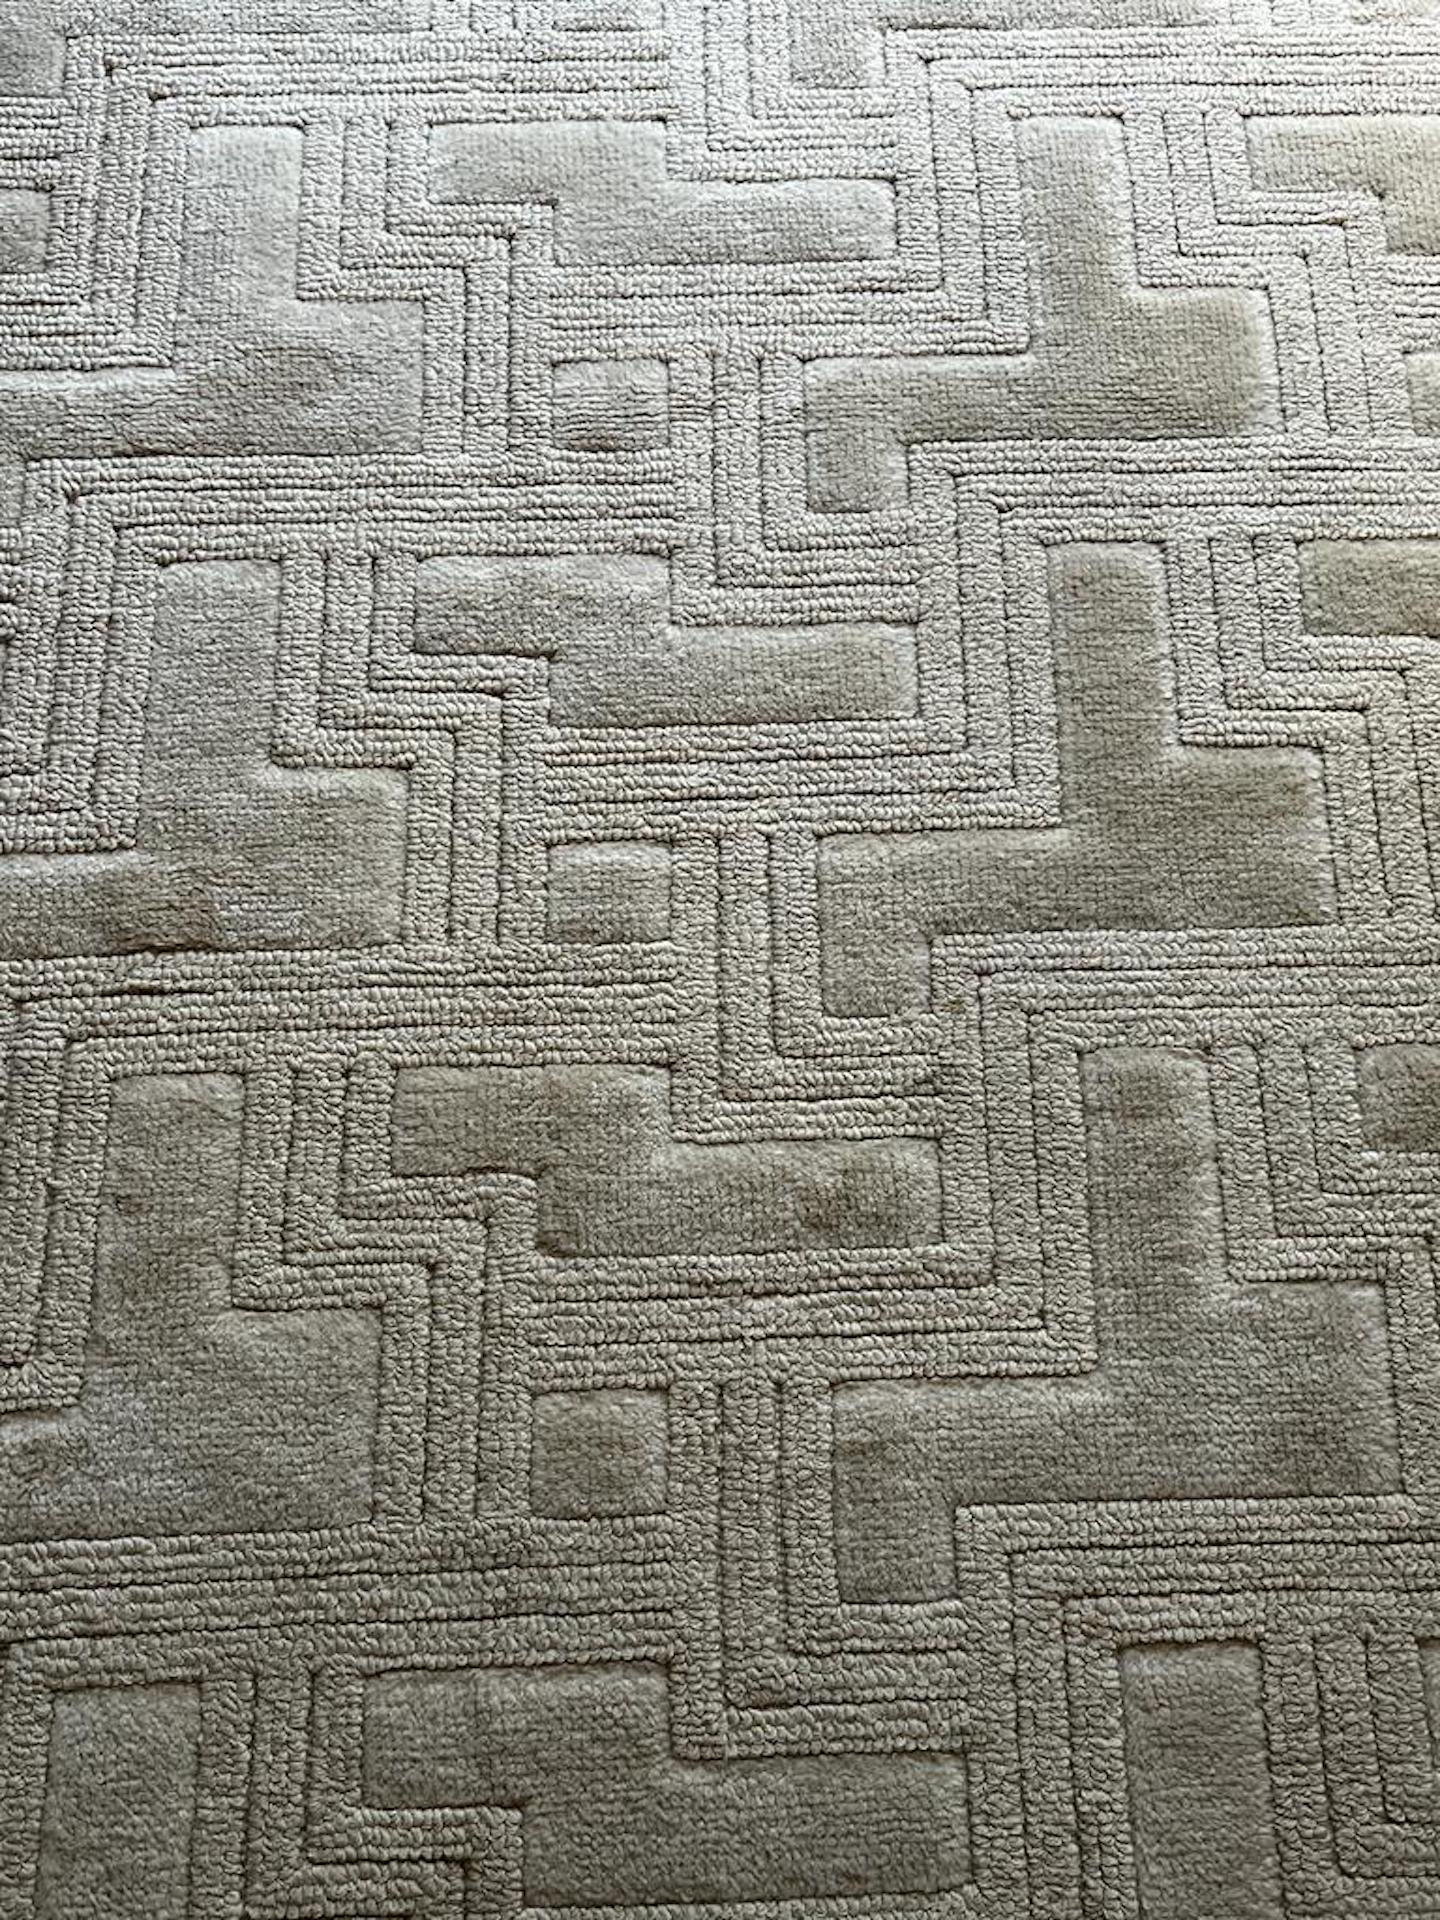 Large knotted and tufted unbleached wool rug with geometric designs of mazes. Label on the back 